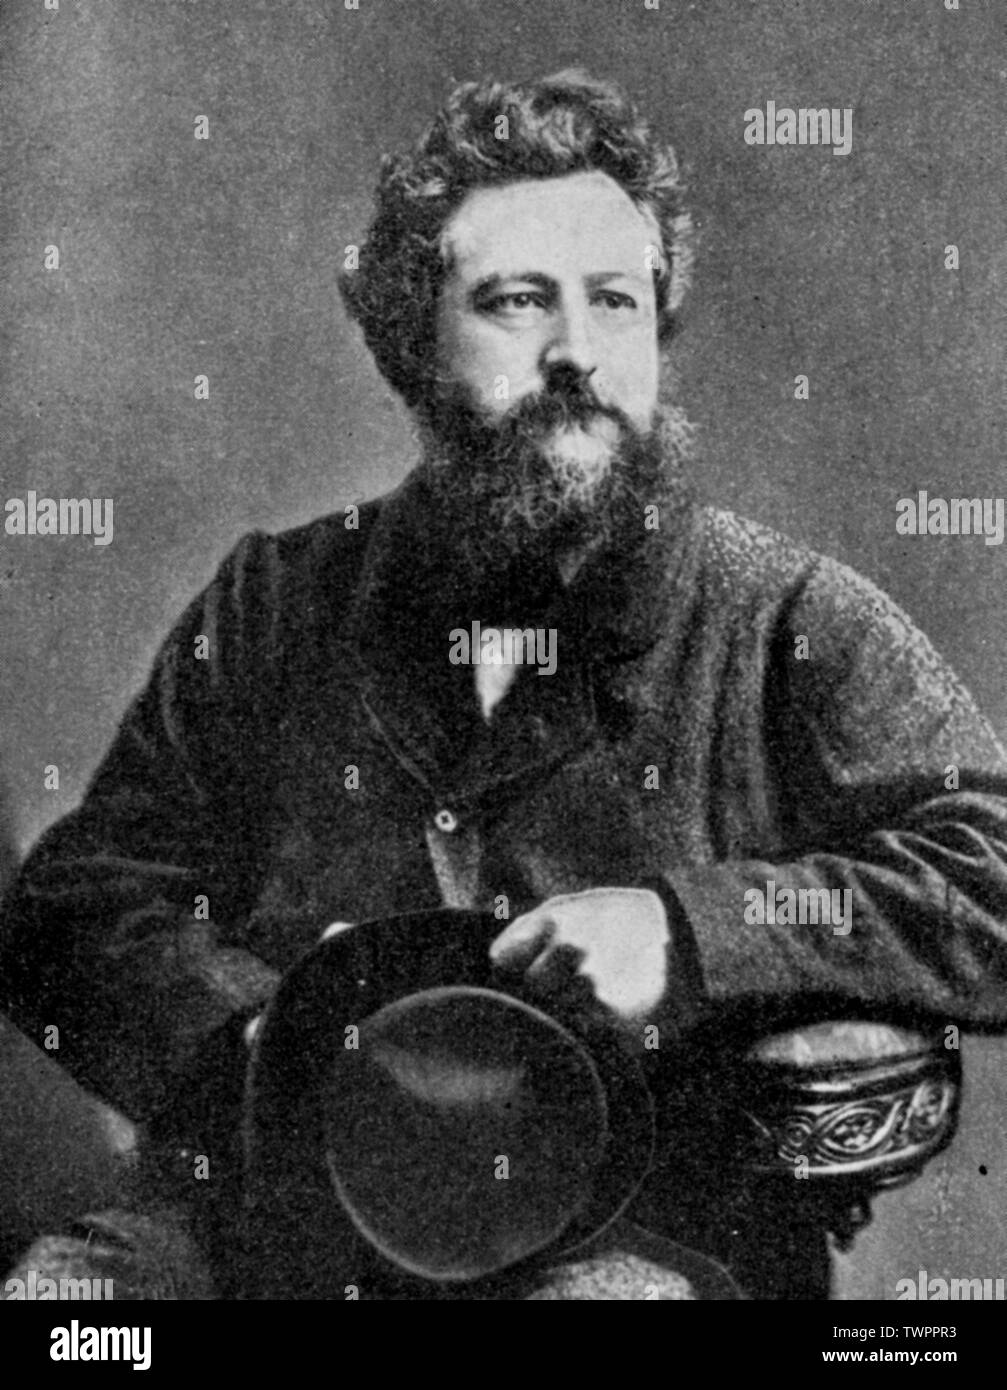 William Morris (1834-1896). From a albumen cabinet card by Elliott & Fry, 21st March 1877. Morris was an English textile designer, artist and writer. The prominent socialist was closely associated with the Pre-Raphaelite Brotherhood and English Arts and Crafts Movement. Stock Photo